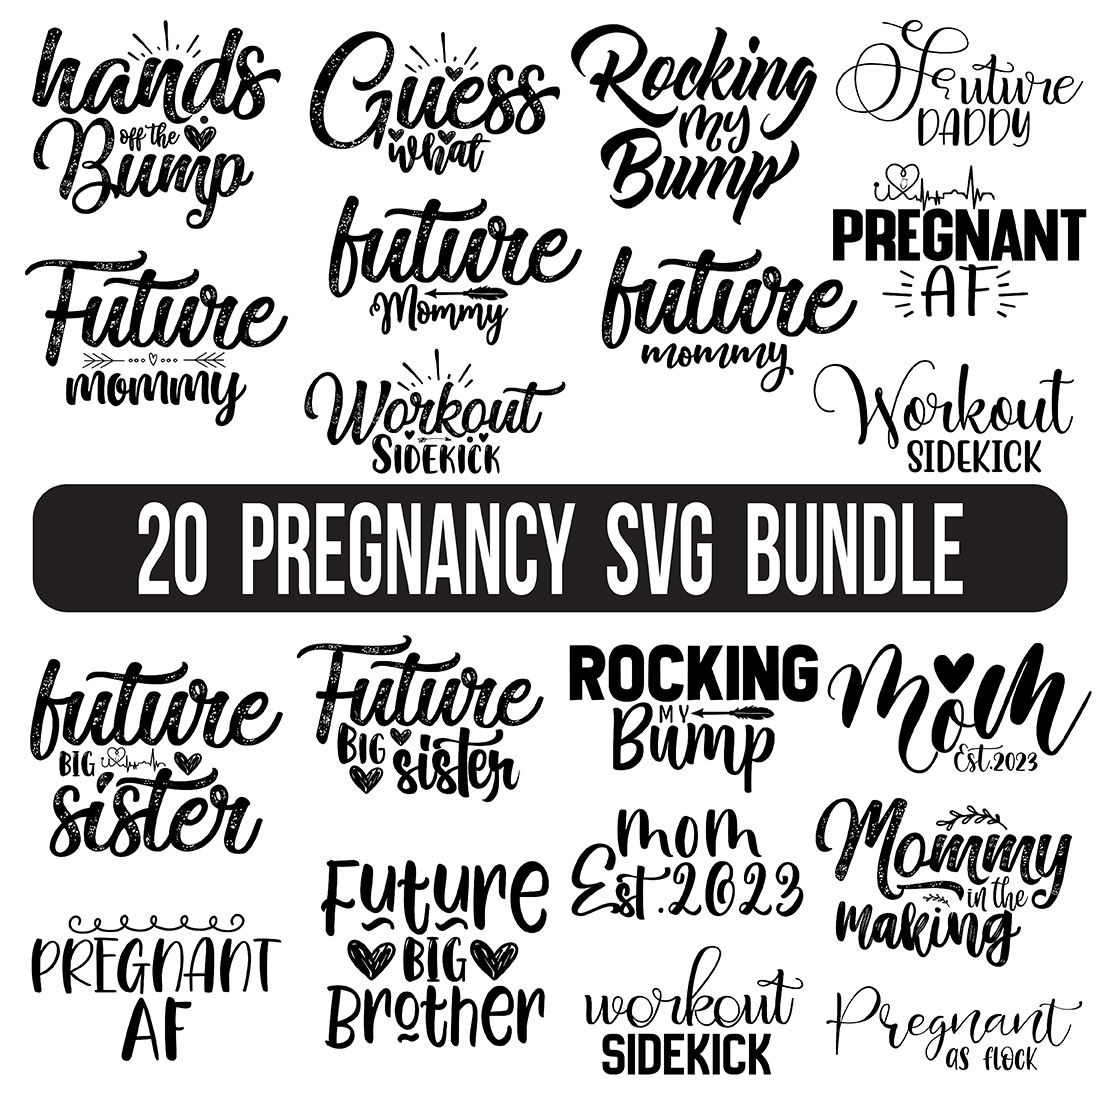 Pack of charming images for prints on the theme of pregnancy.